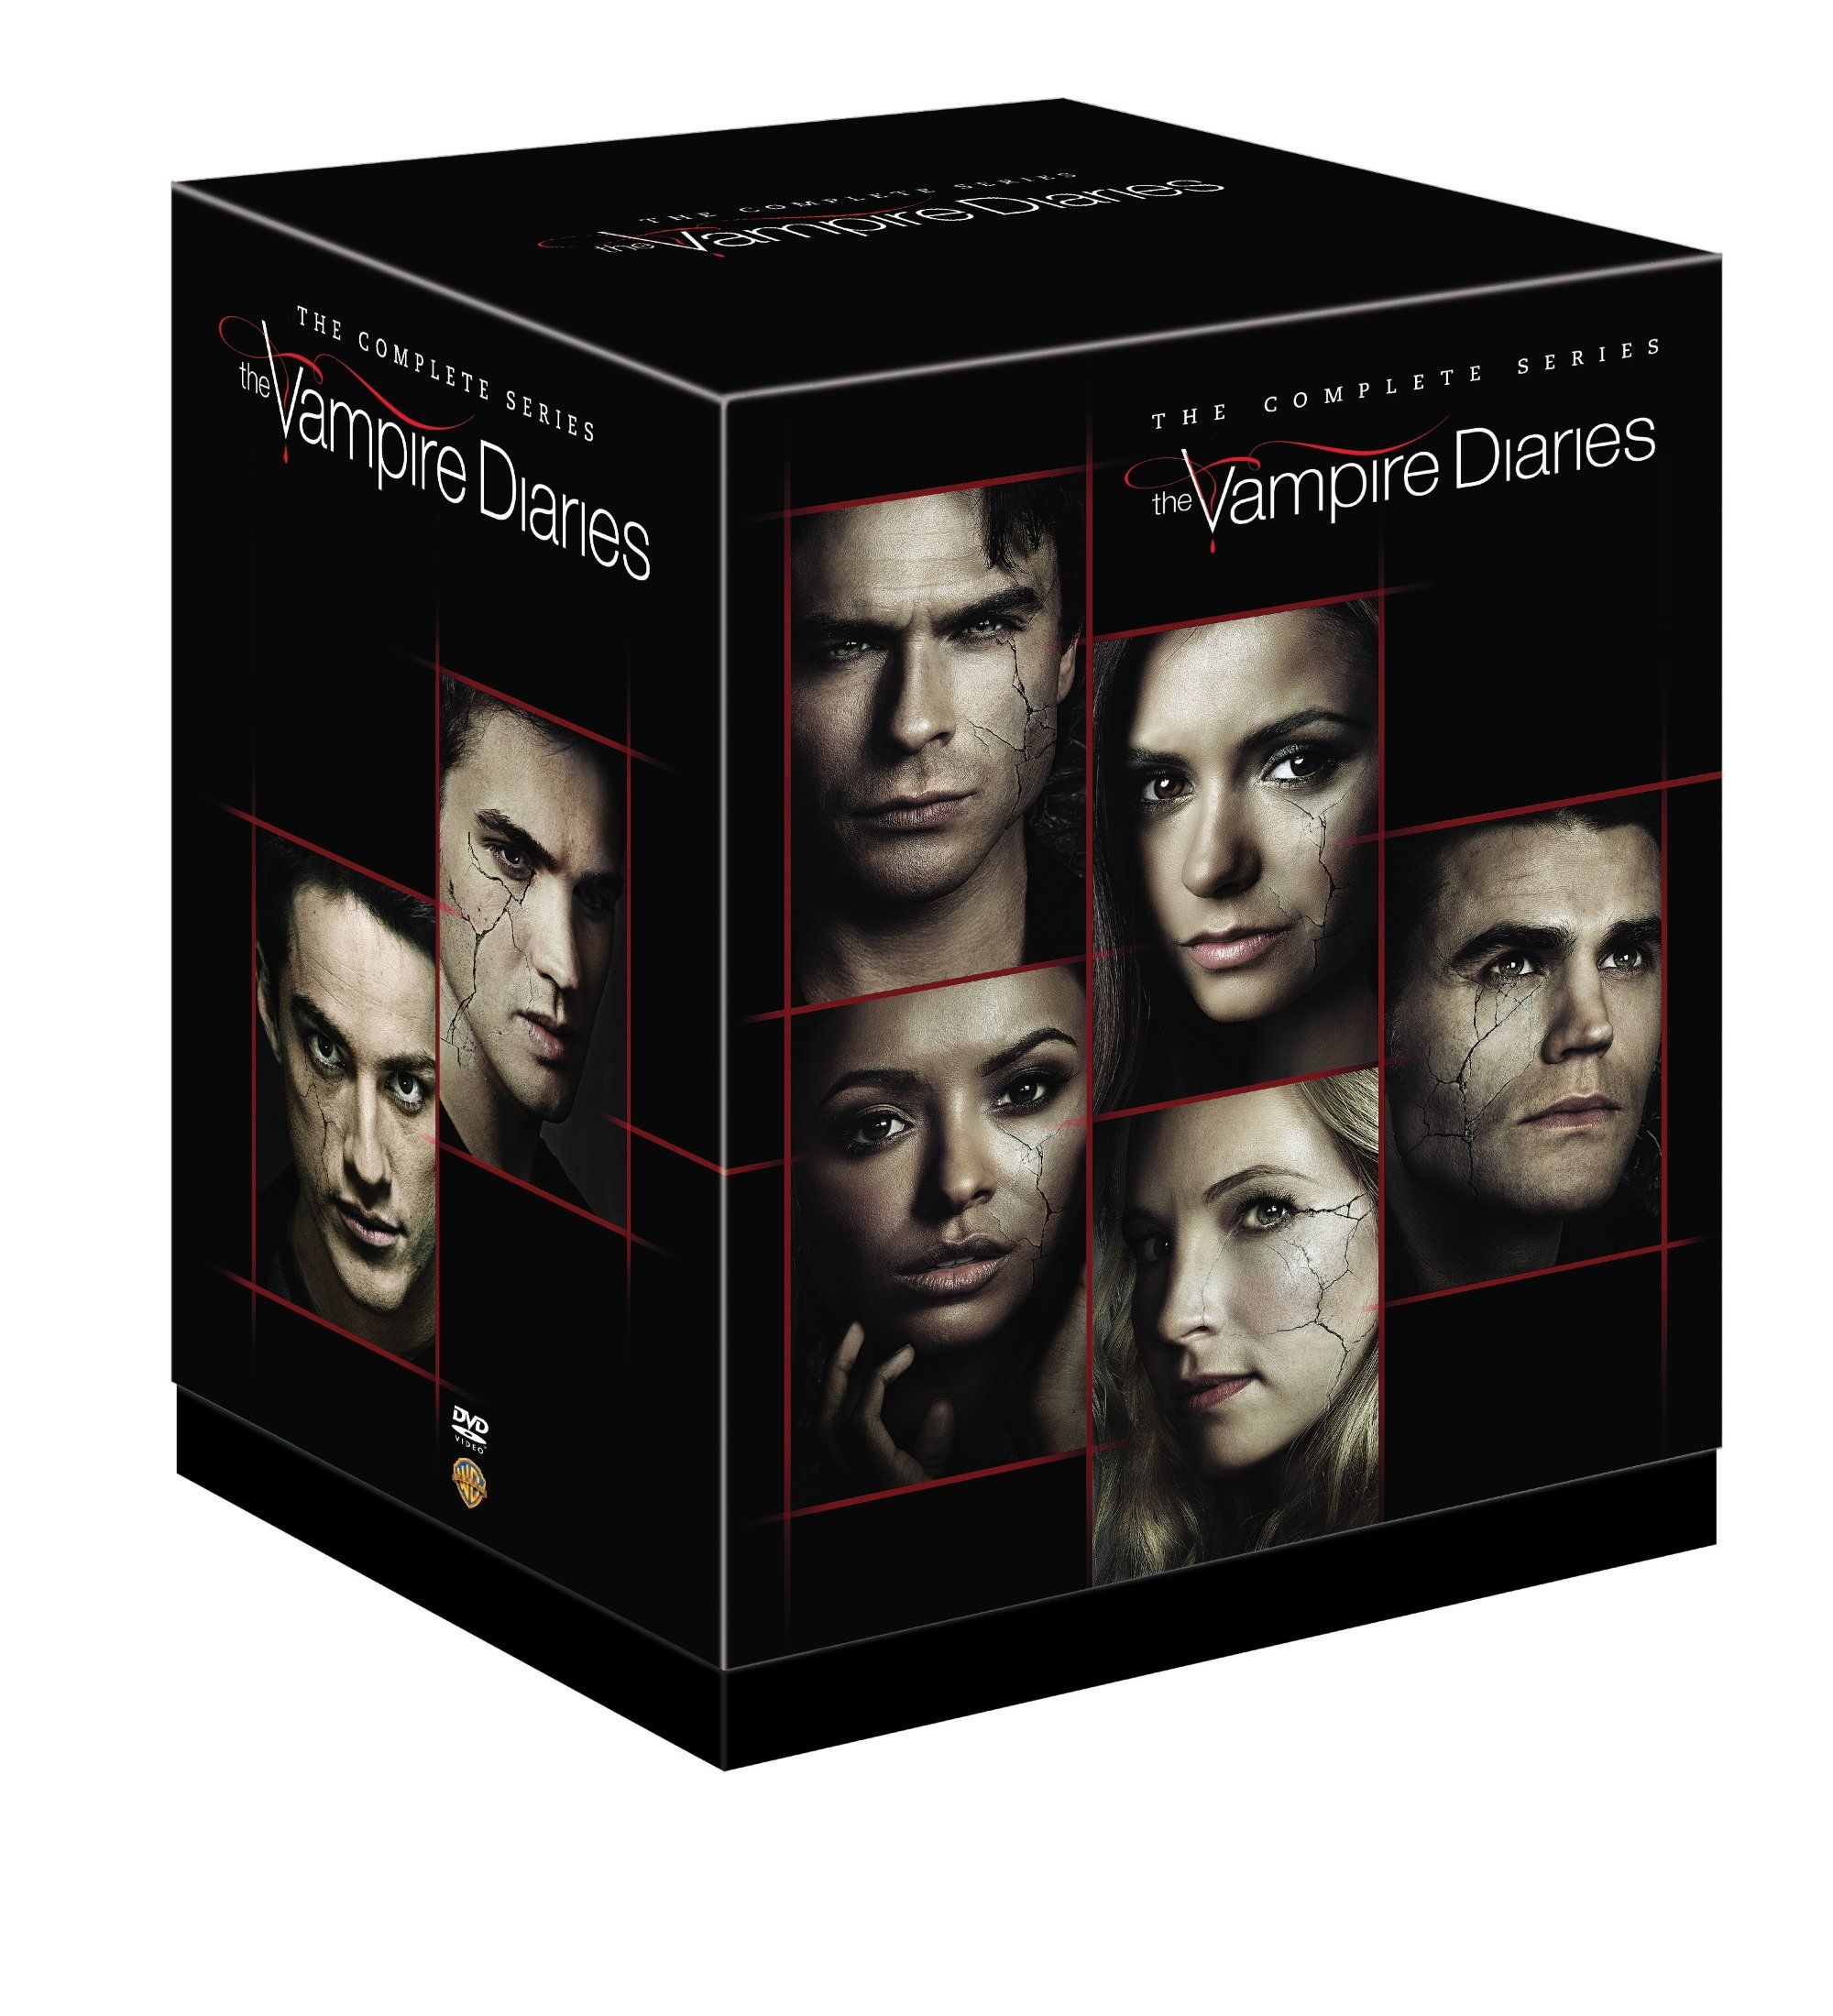 The Vampire Diaries: The Complete Series [DVD]